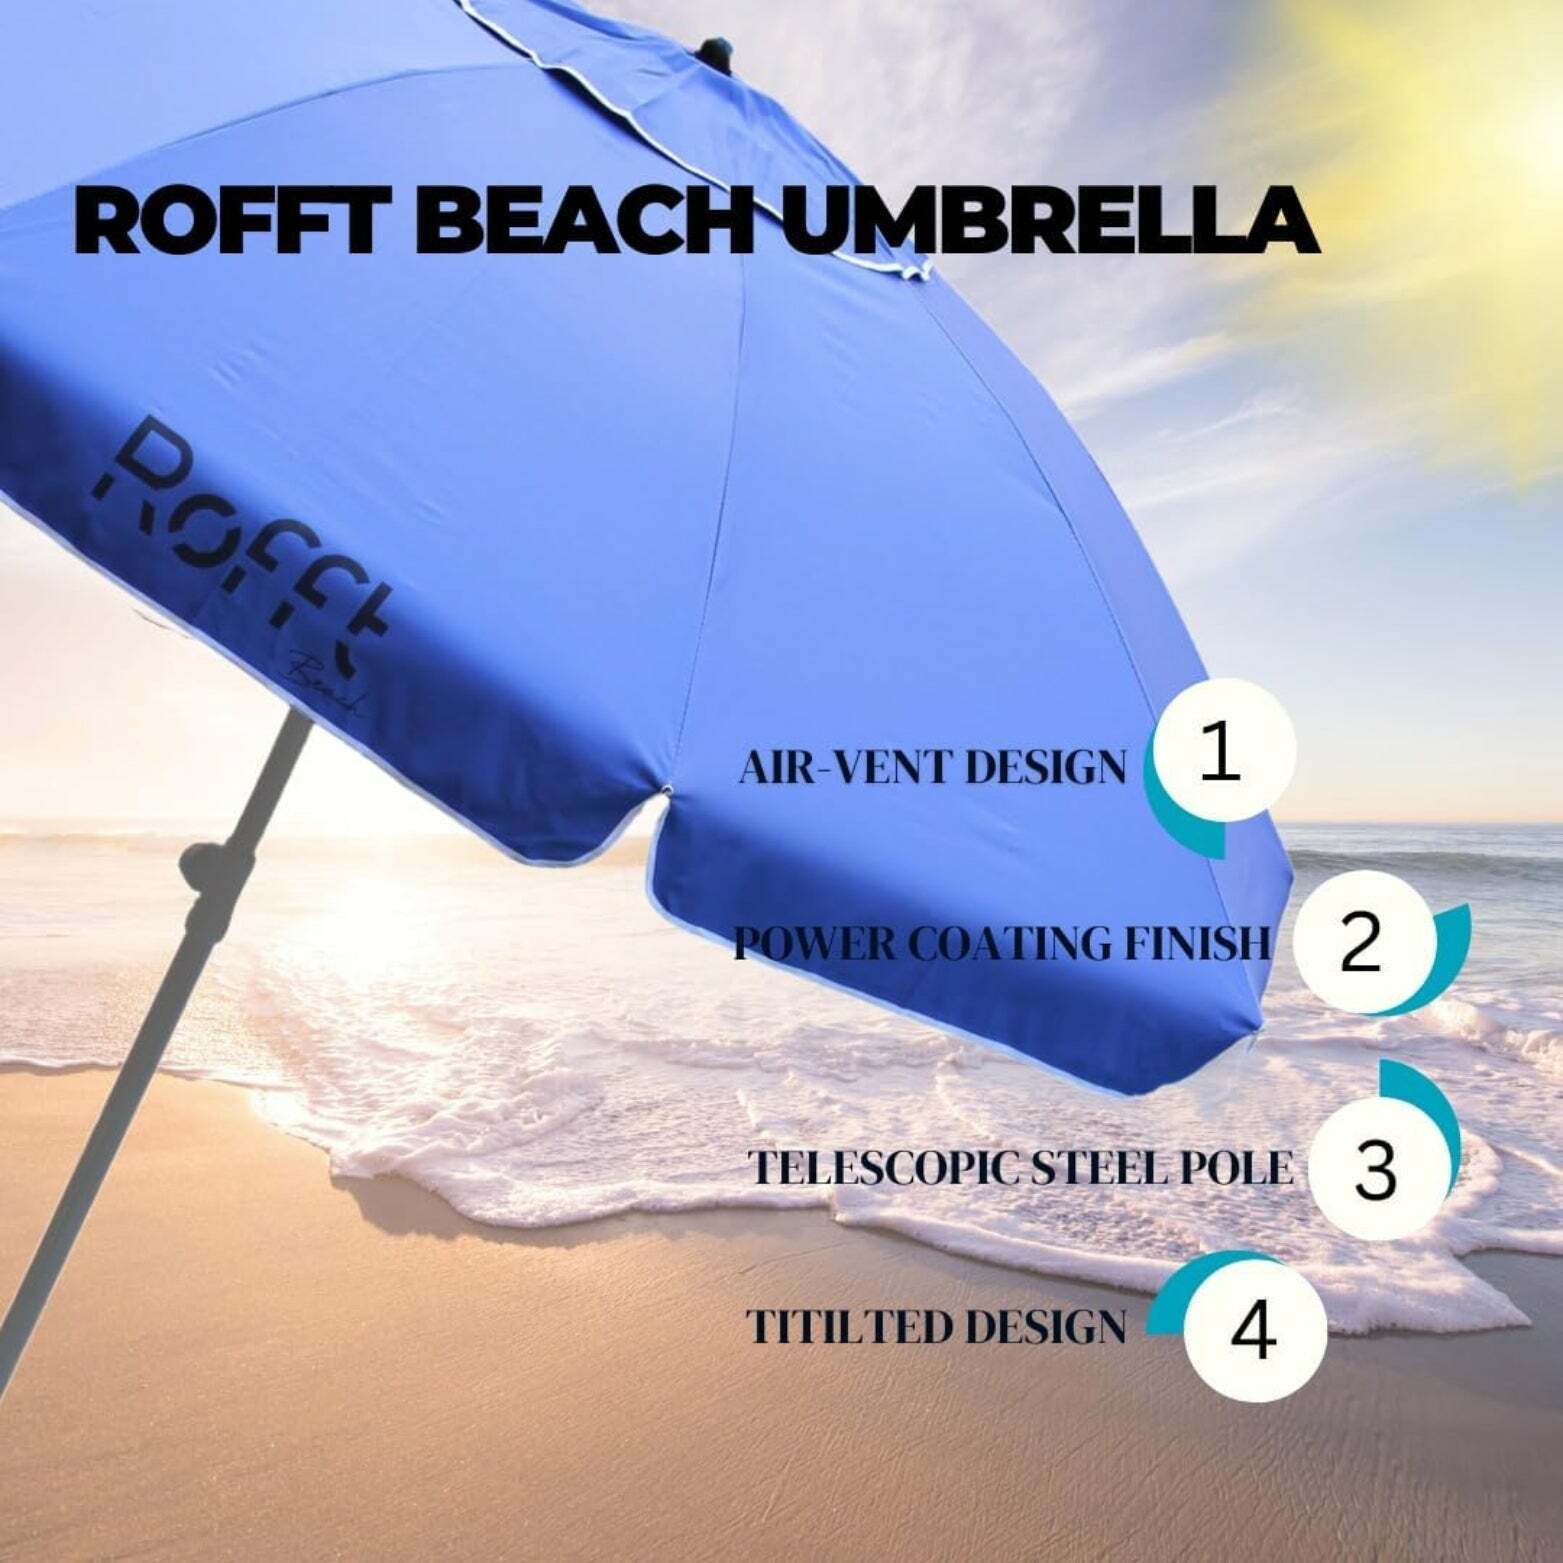 ROFFT Sturdy Beach Umbrella with UV Protection and Windproof Design - 6.5 Ft Coverage, Steel & Aluminum Pole, Tilt Adjustment